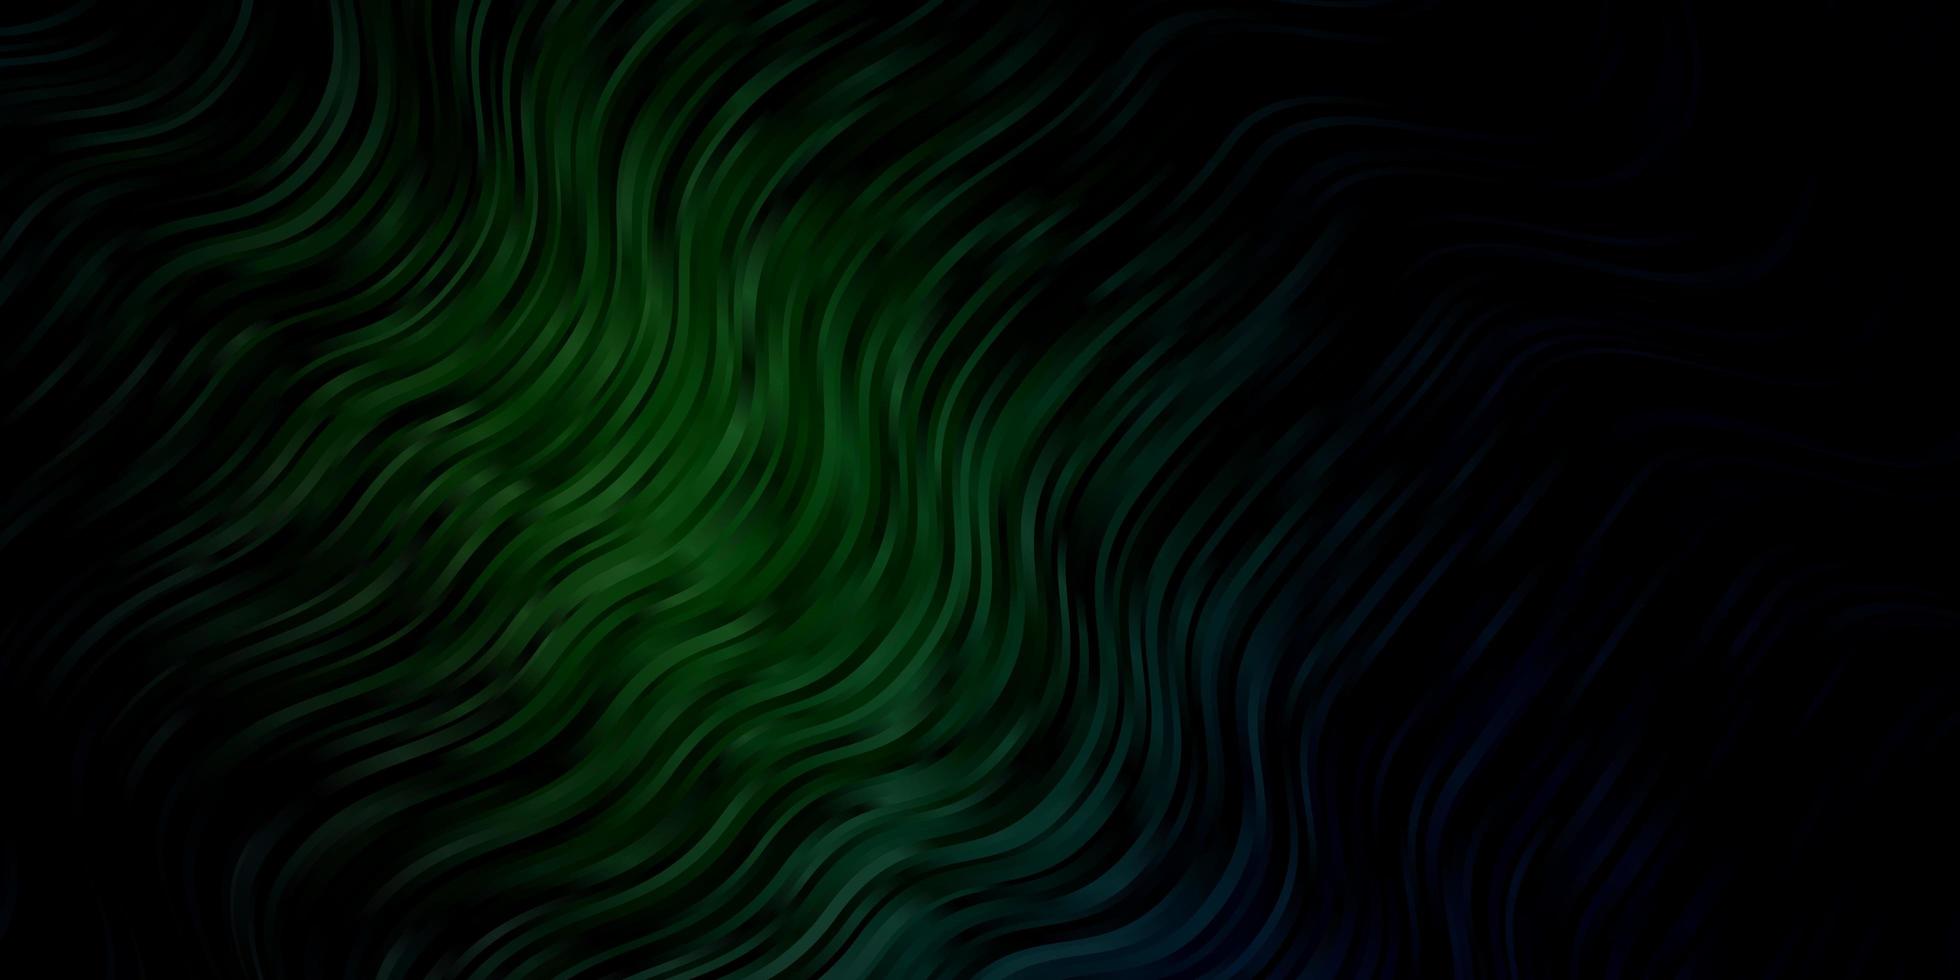 Dark Green vector pattern with lines